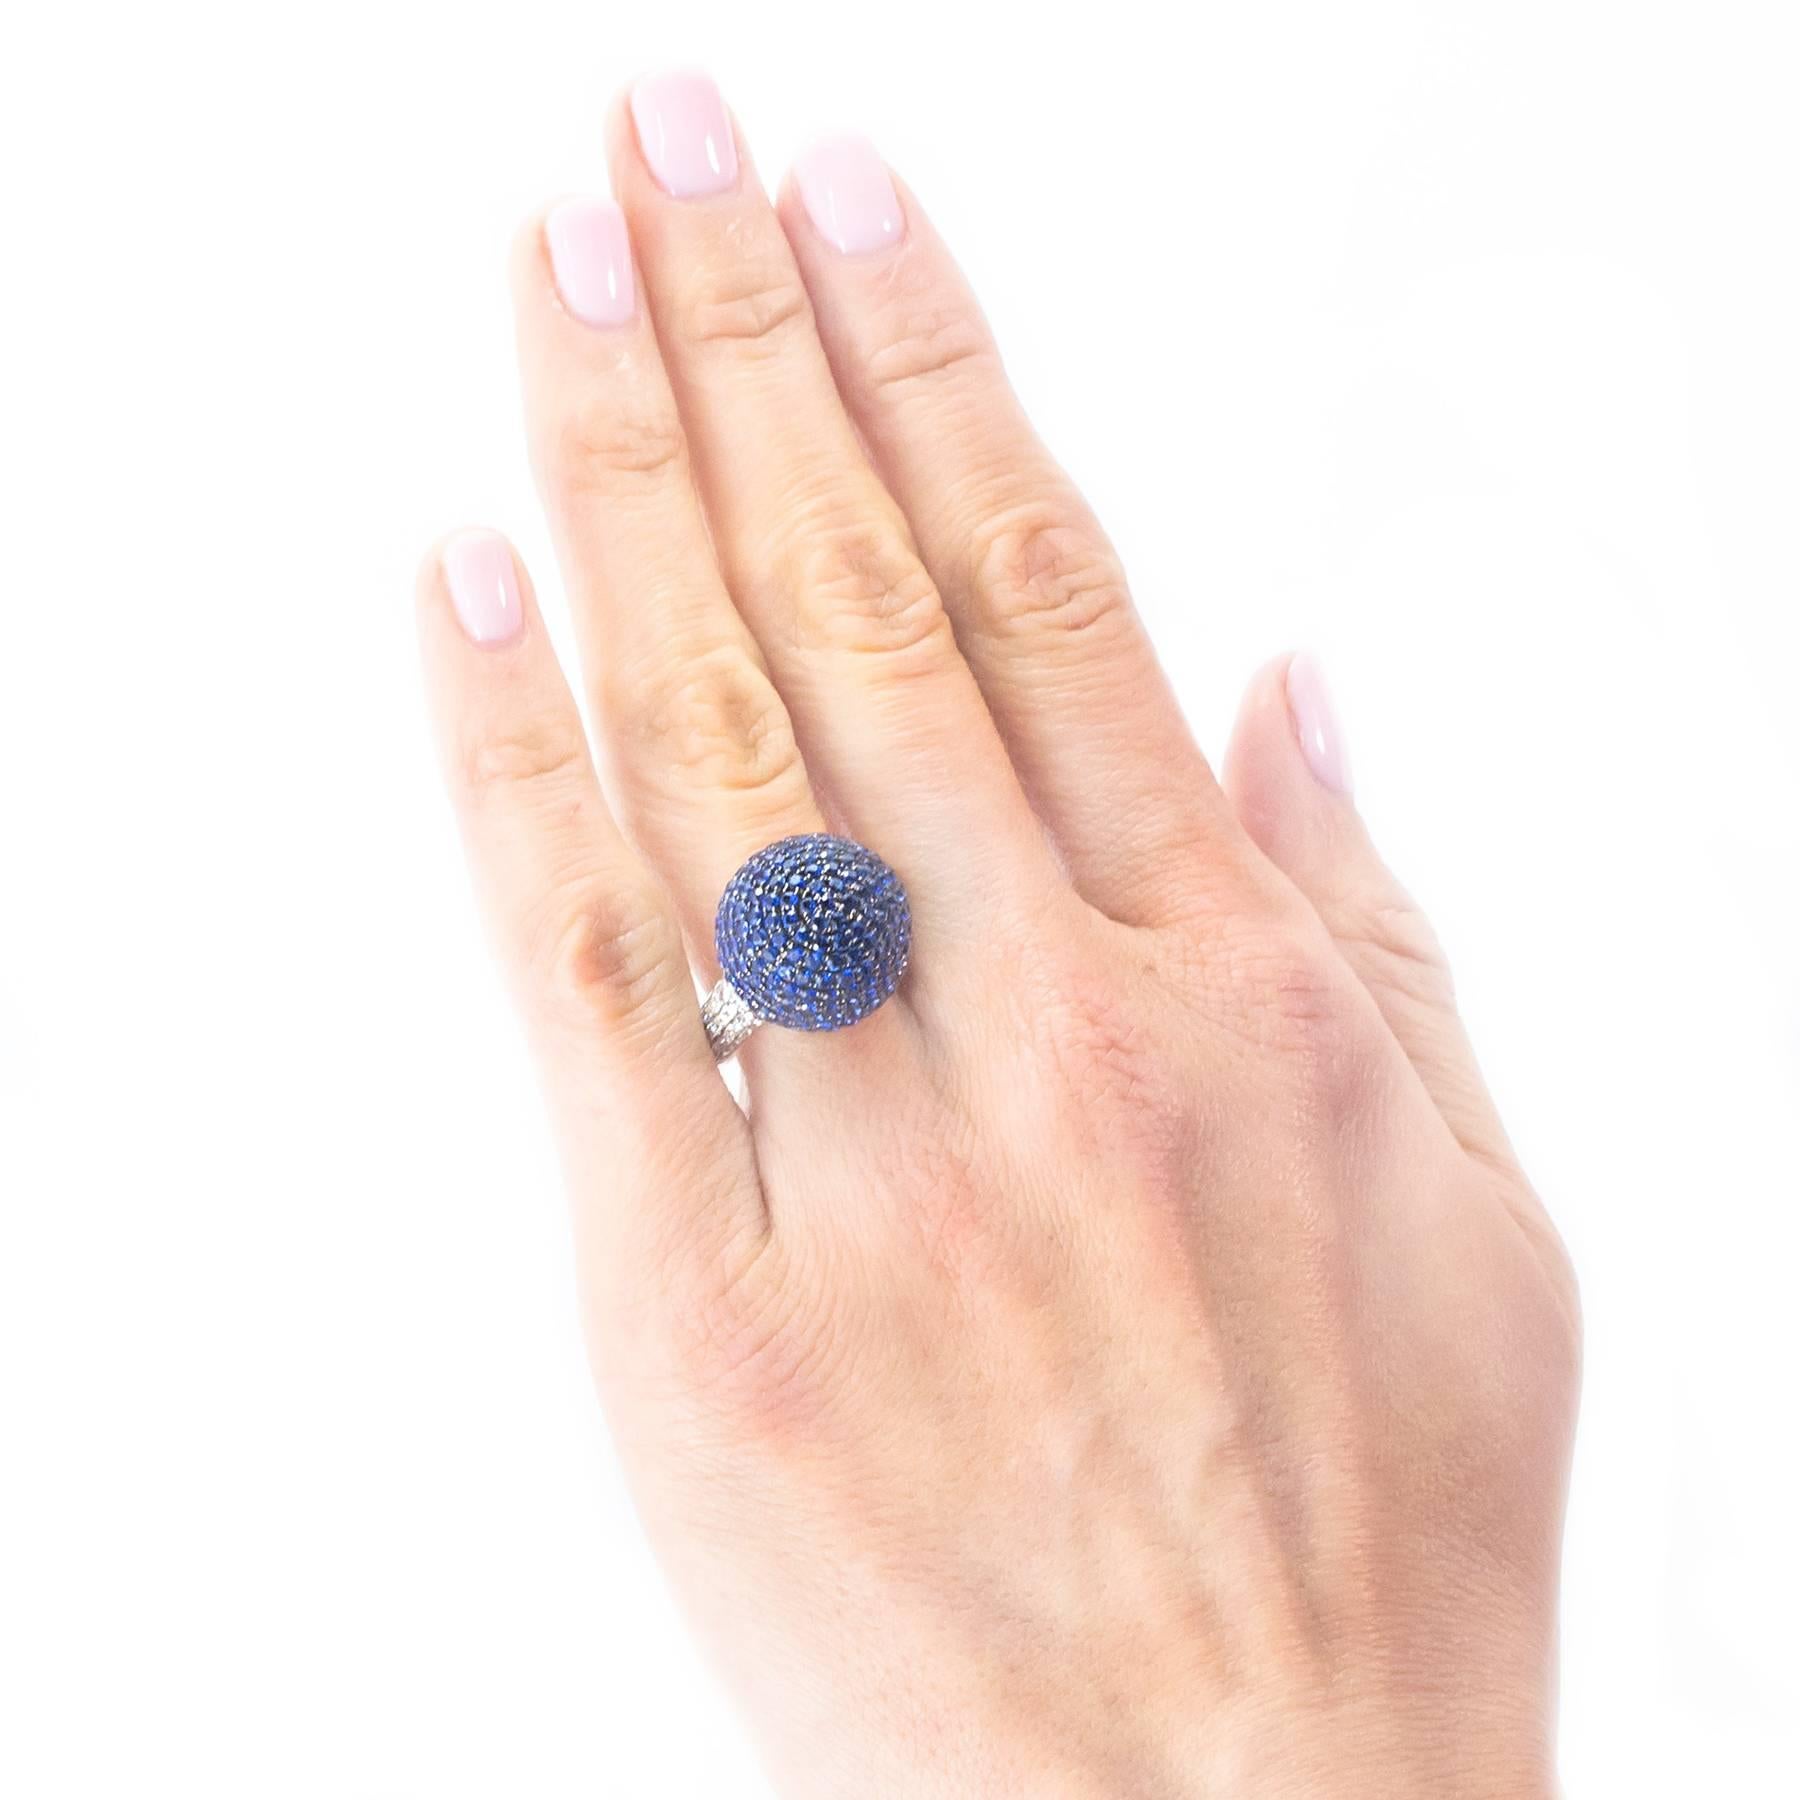 A gorgeous Blue Sapphire Diamond Ball Ring. The 15mm Blue Sapphire Orb is pave set with 5.08 carats of gemstones. It is flanked on each side by 56 round, Brilliant cut pave set Diamonds totaling approximately .56 carat.

The Orb is flattened at the